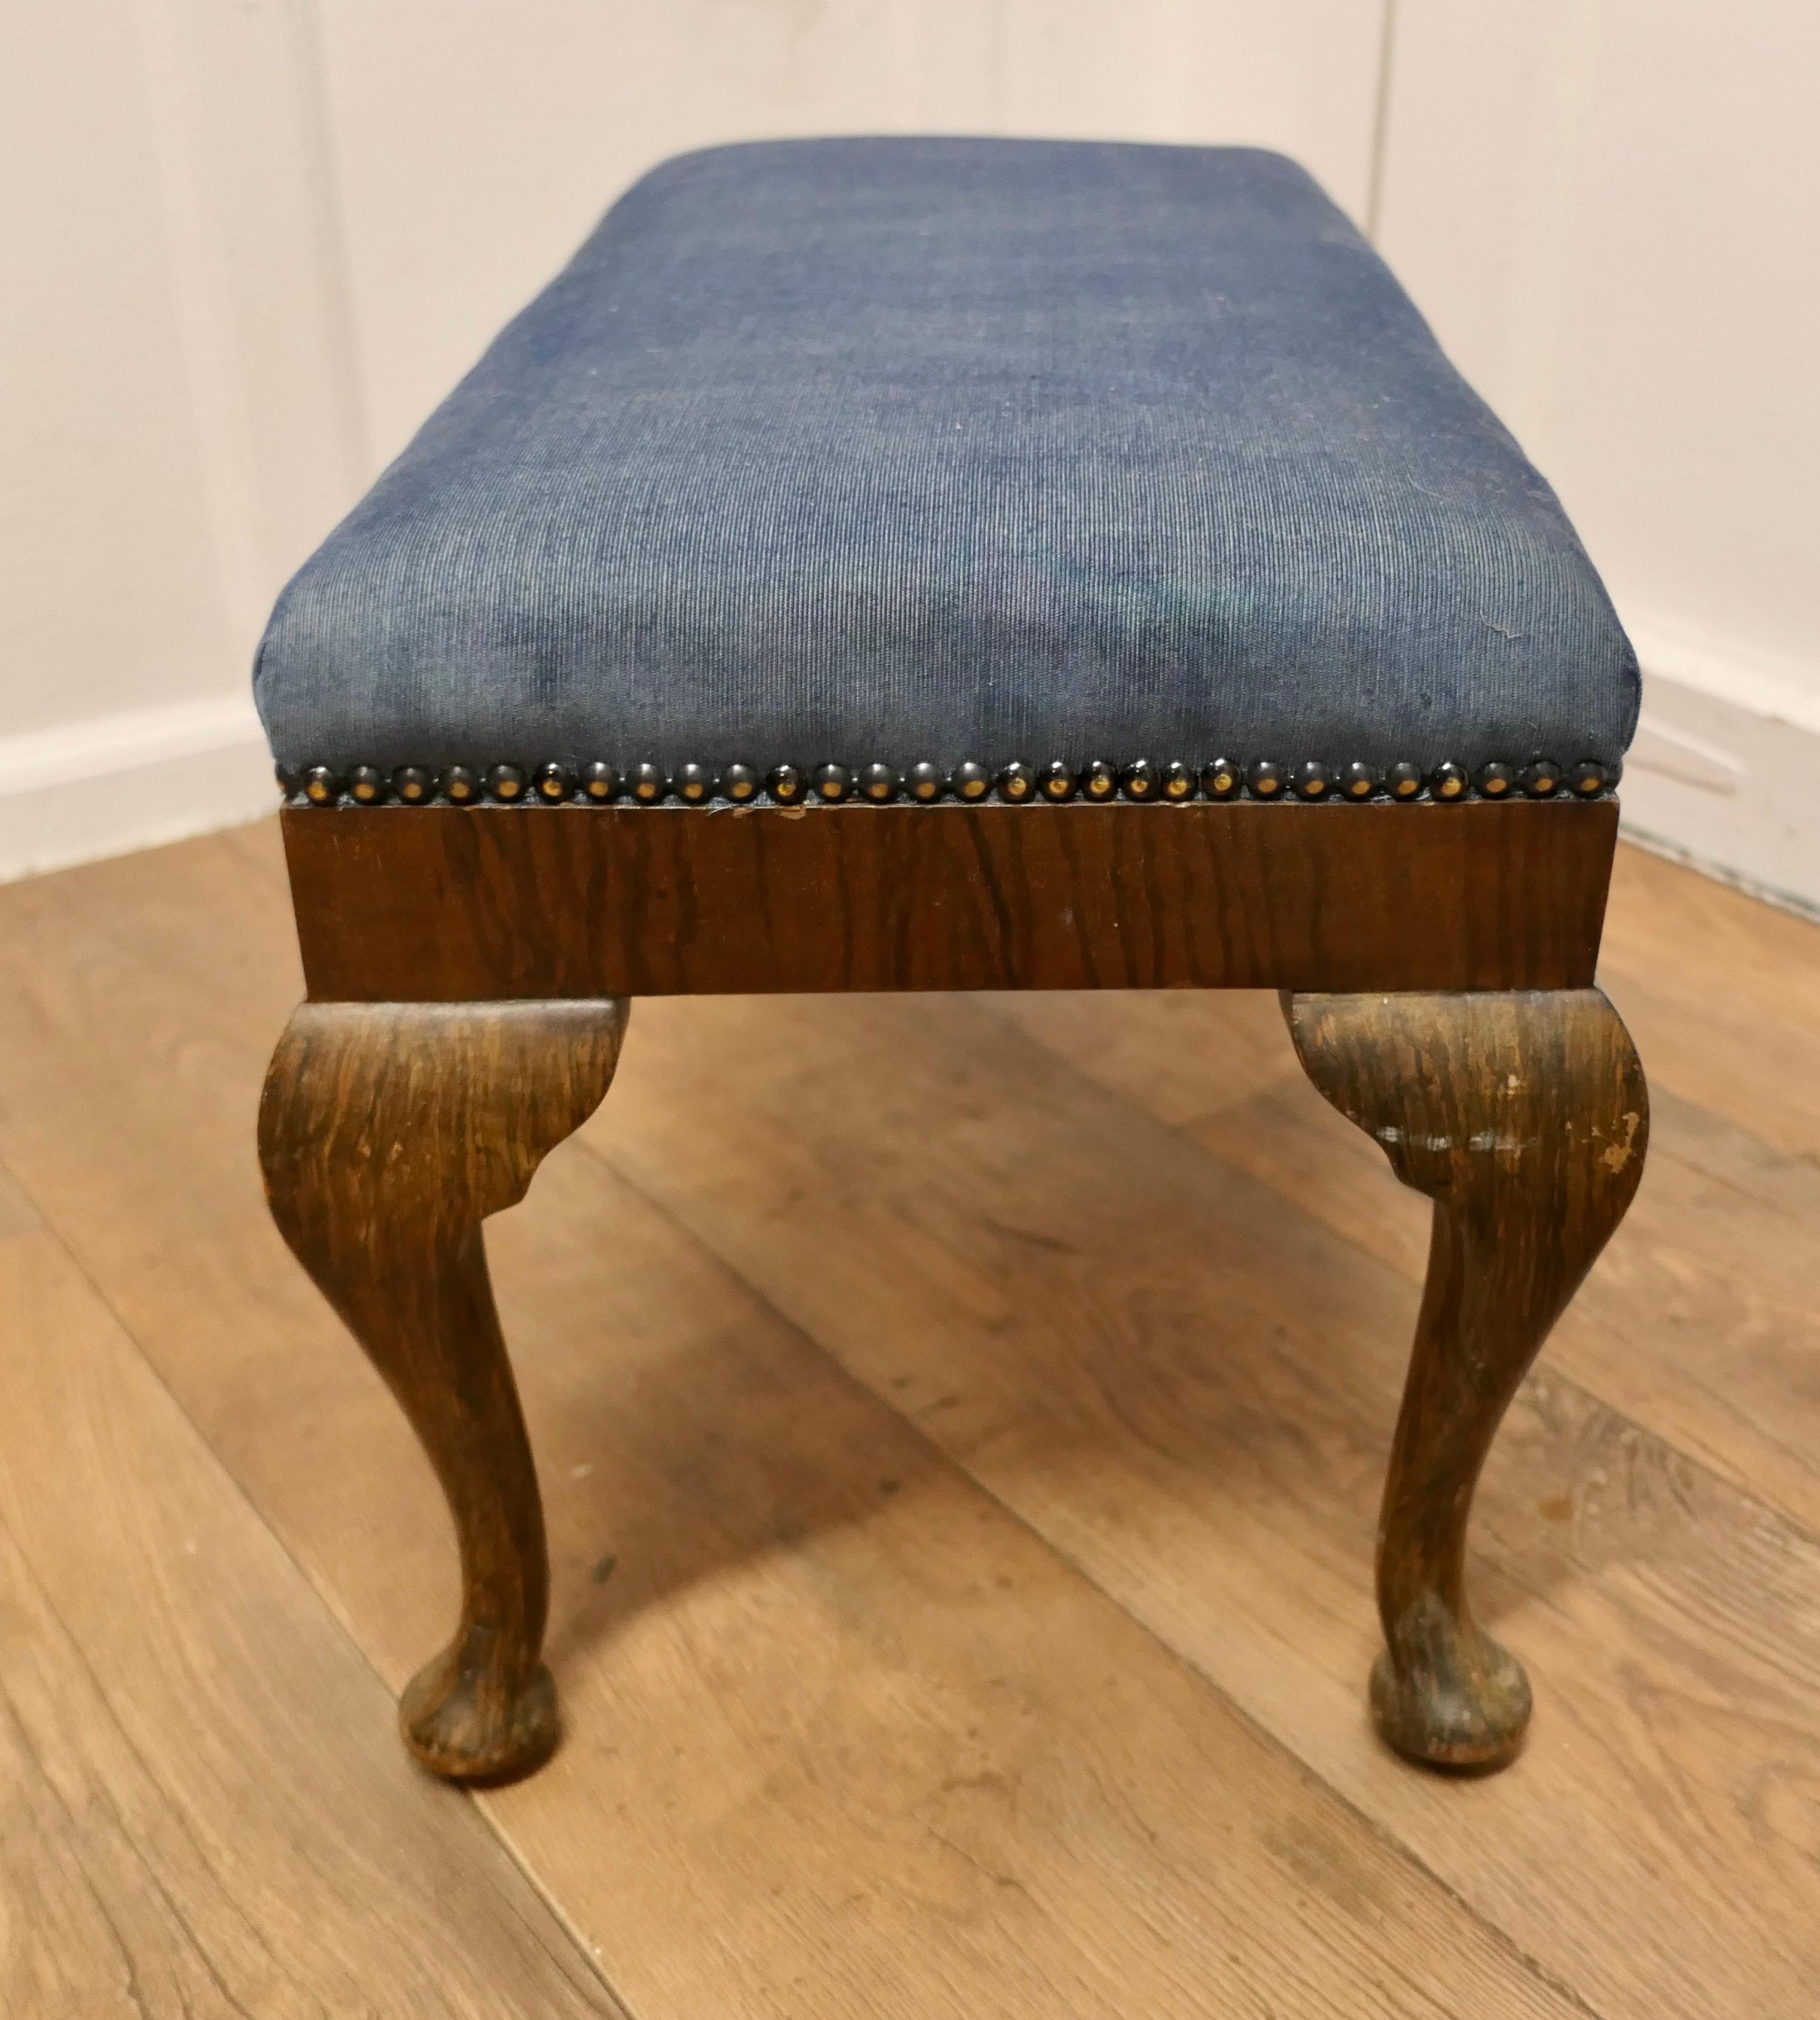 Early 20th Century Cabriole Leg Velvet Window Stool    This is a good Sturdy Stool   For Sale